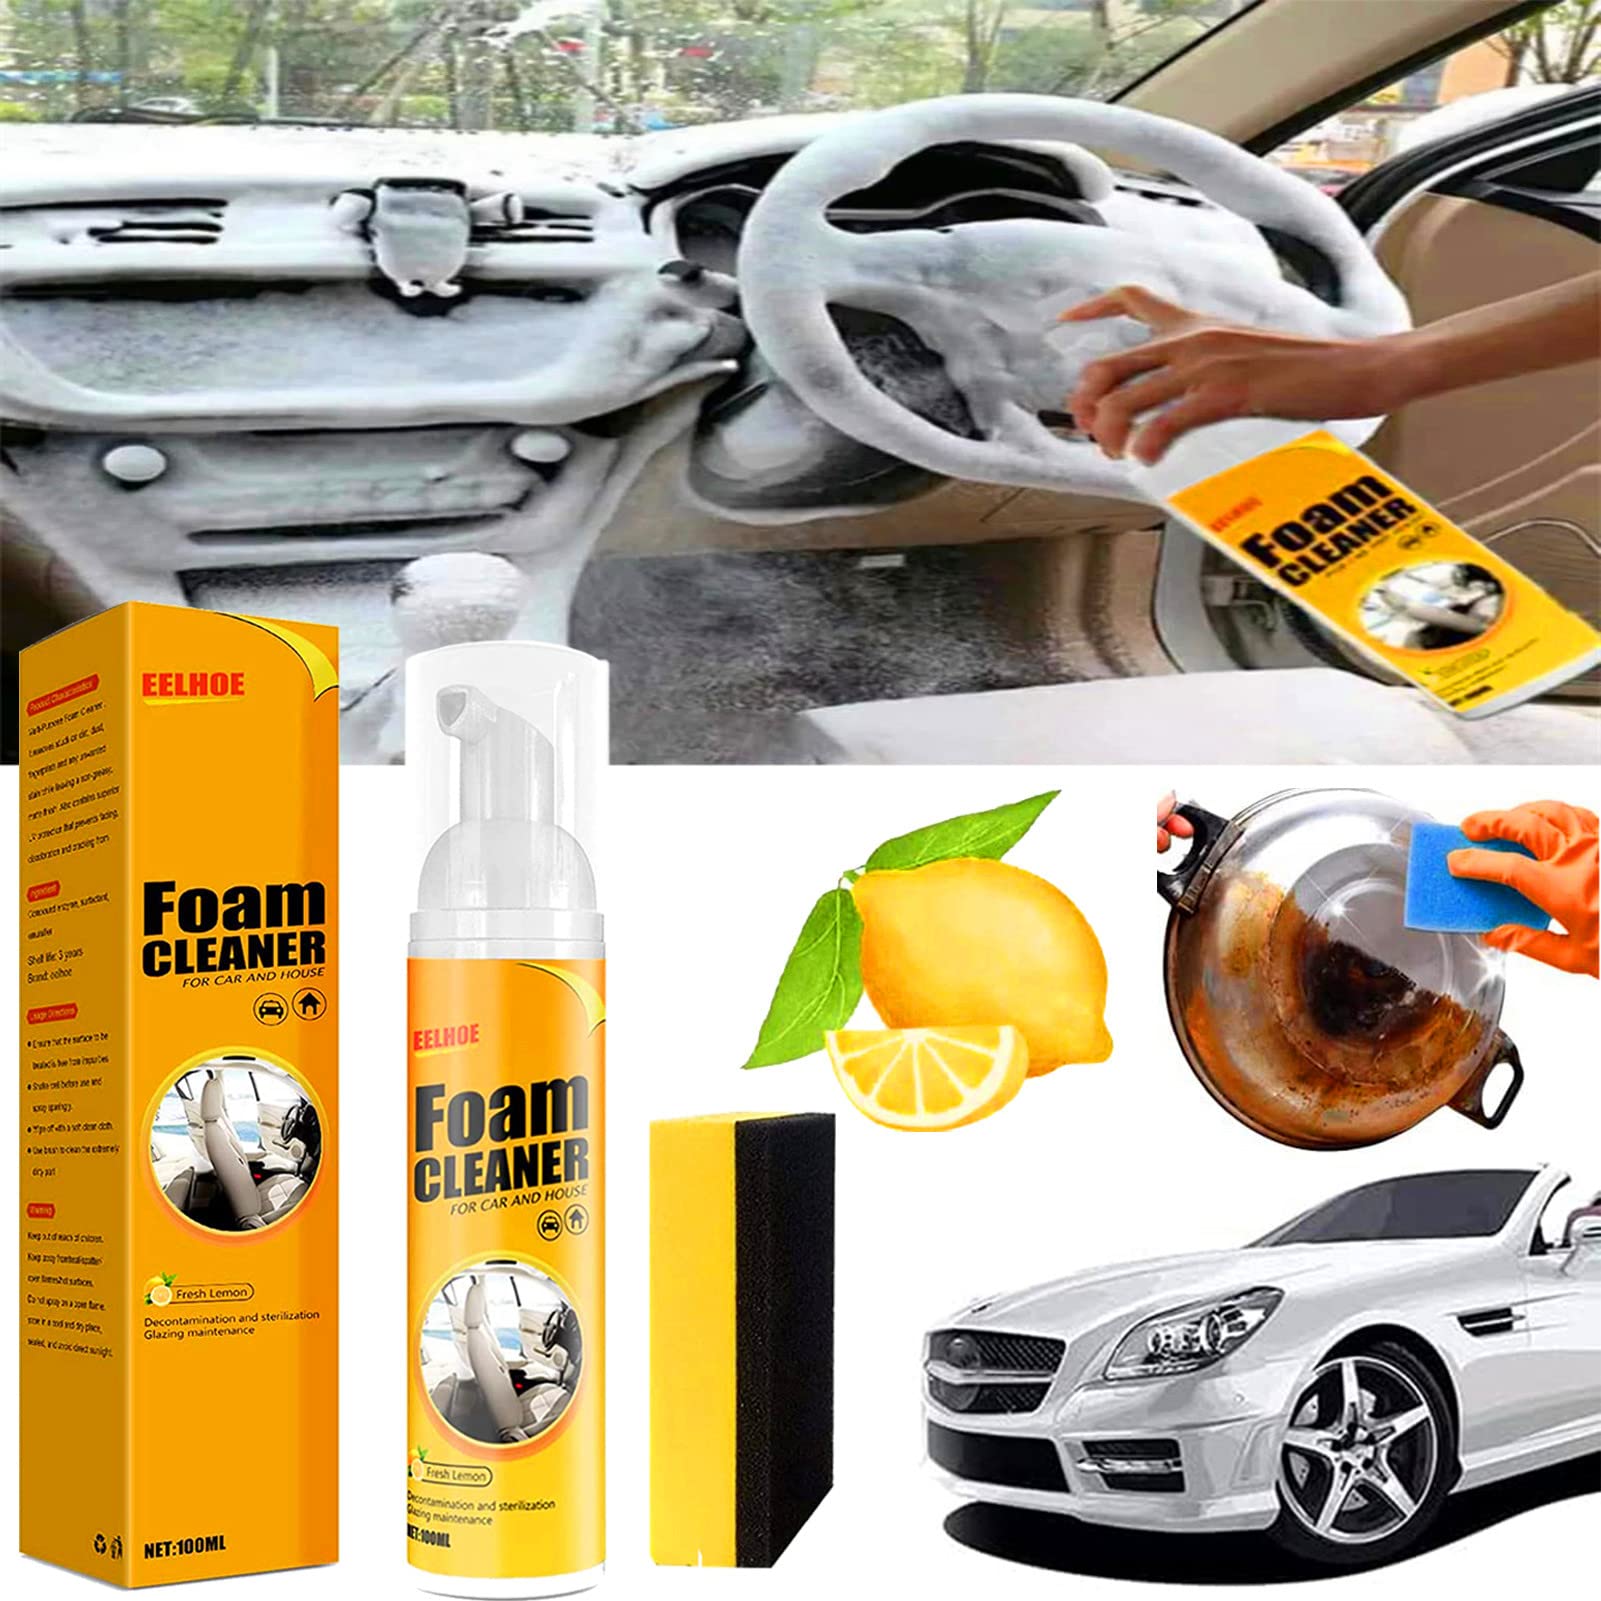 Multi Functional Foam Cleaner for Car and House 650ML Spray to Clean  Everything. (BUY ONE TAKE ONE PROMO SALE). by Dolittle All Purpose Cleaner  Spray Carpet and Upholstery Cleaner Multi Functional Foam